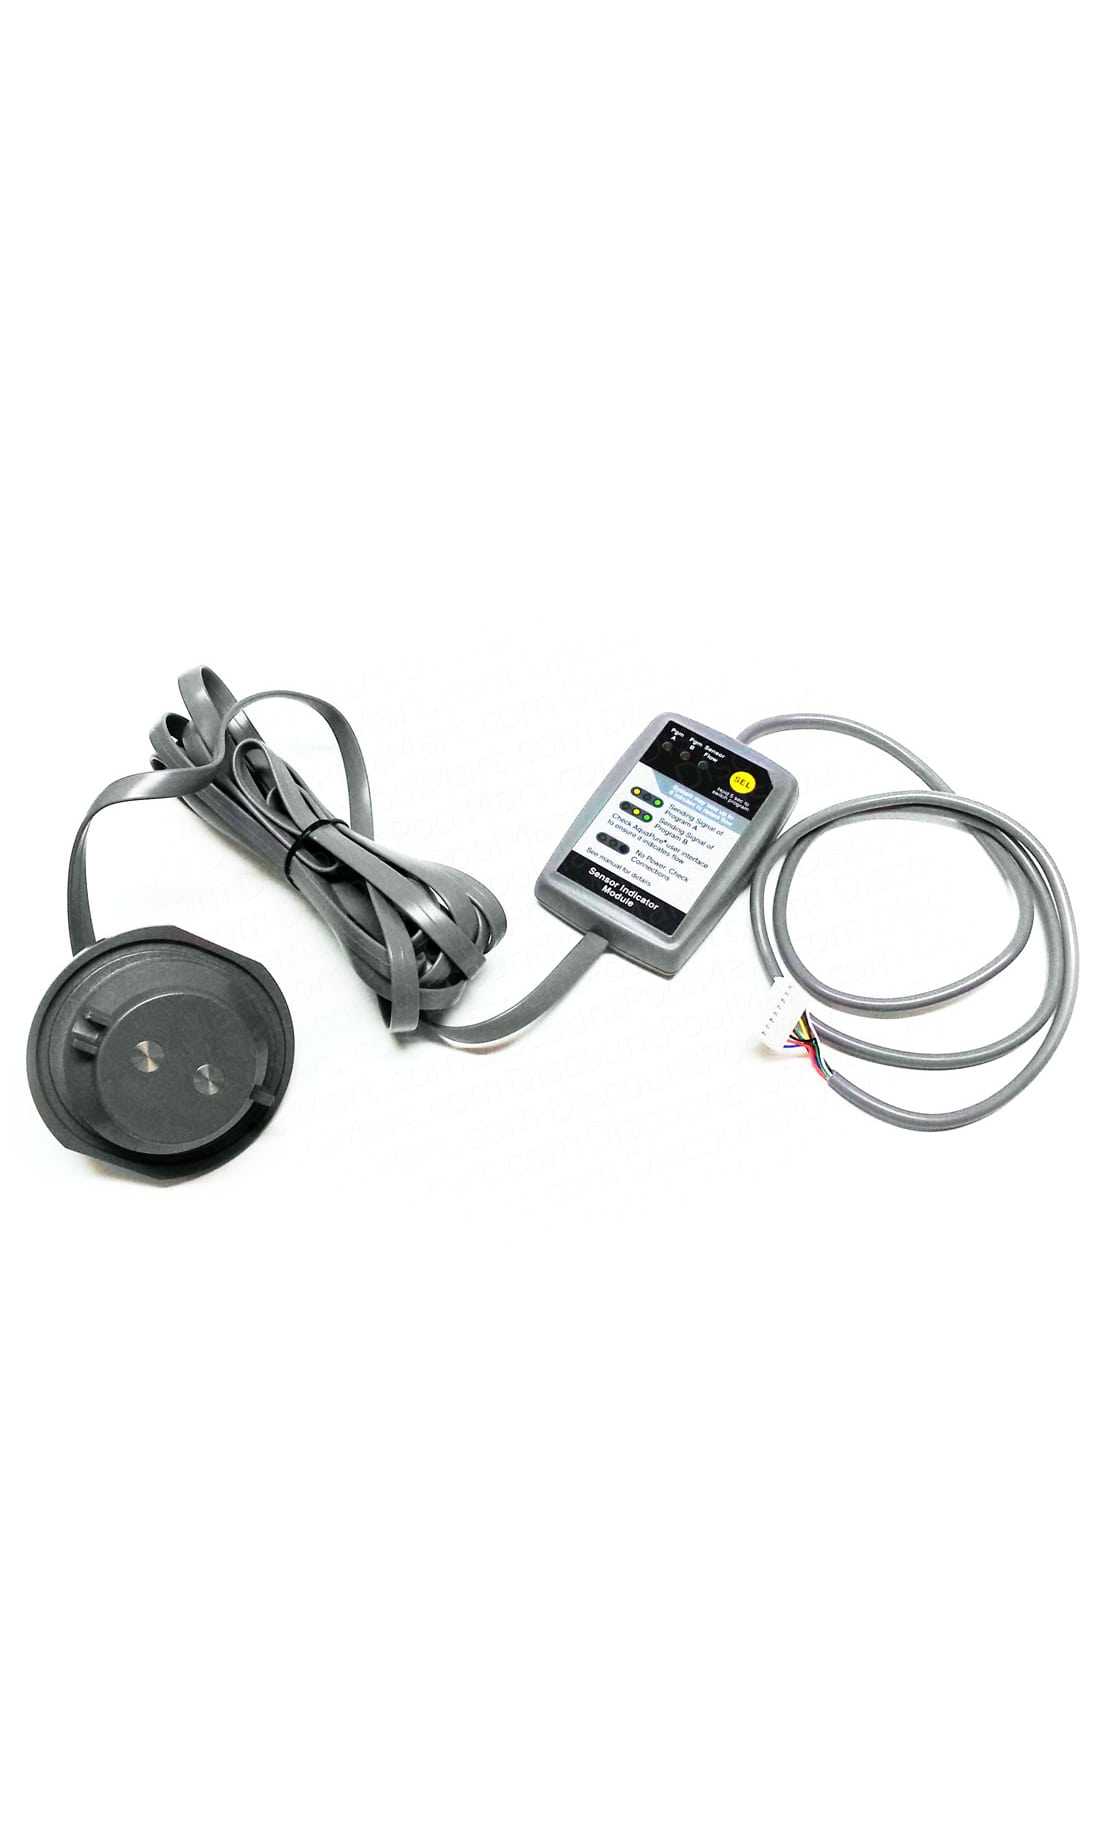 Zodiac Systems | Jandy Pro Series, Jandy AquaPure | Fusion Soft Slotted Flow Sensor, 3-Port Cell (16') - R0452501